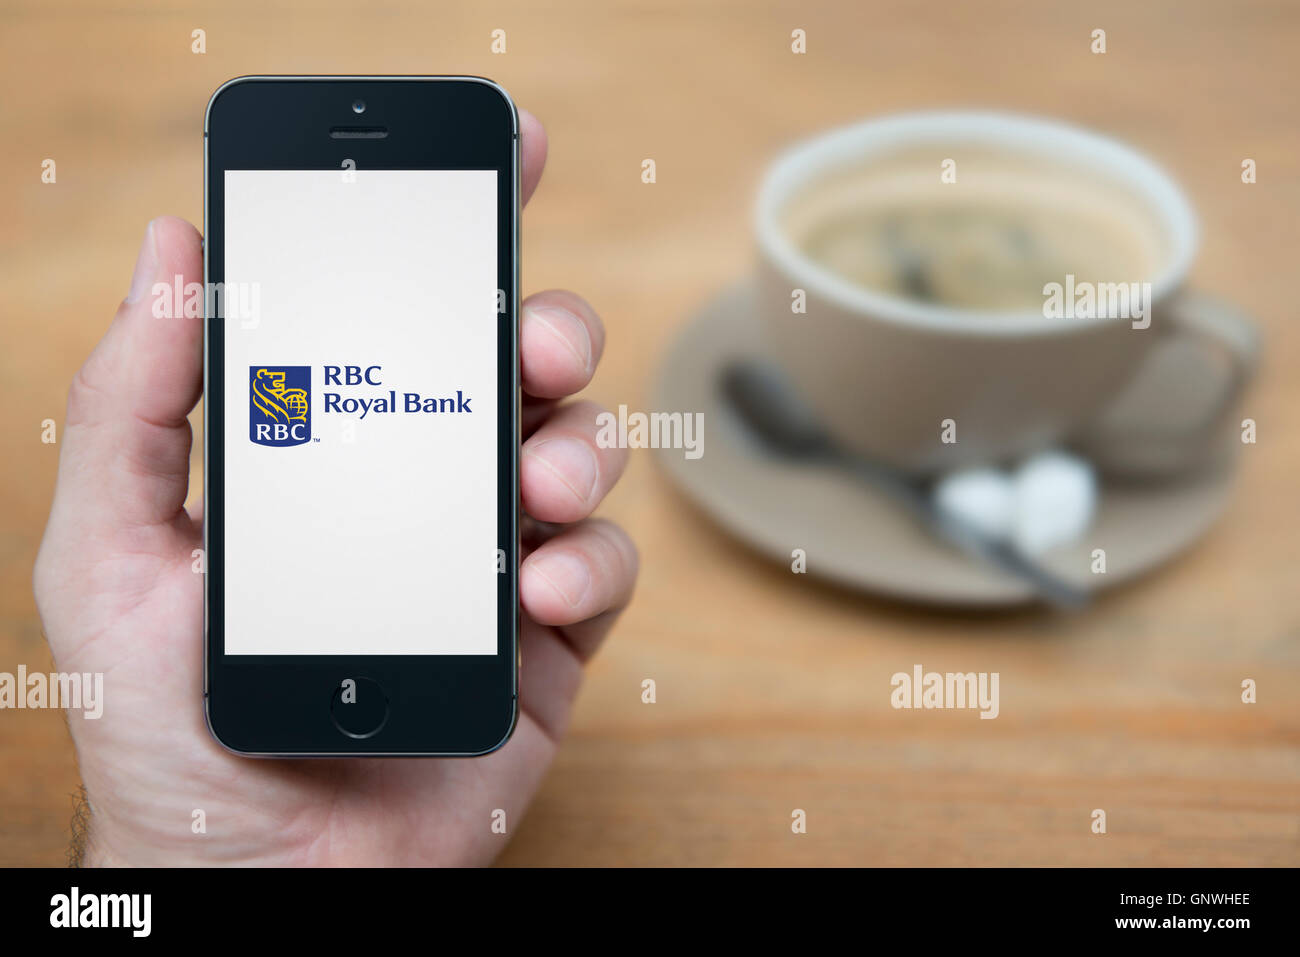 A man looks at his iPhone which displays the RBC Royal Bank logo, while sat with a cup of coffee (Editorial use only). Stock Photo